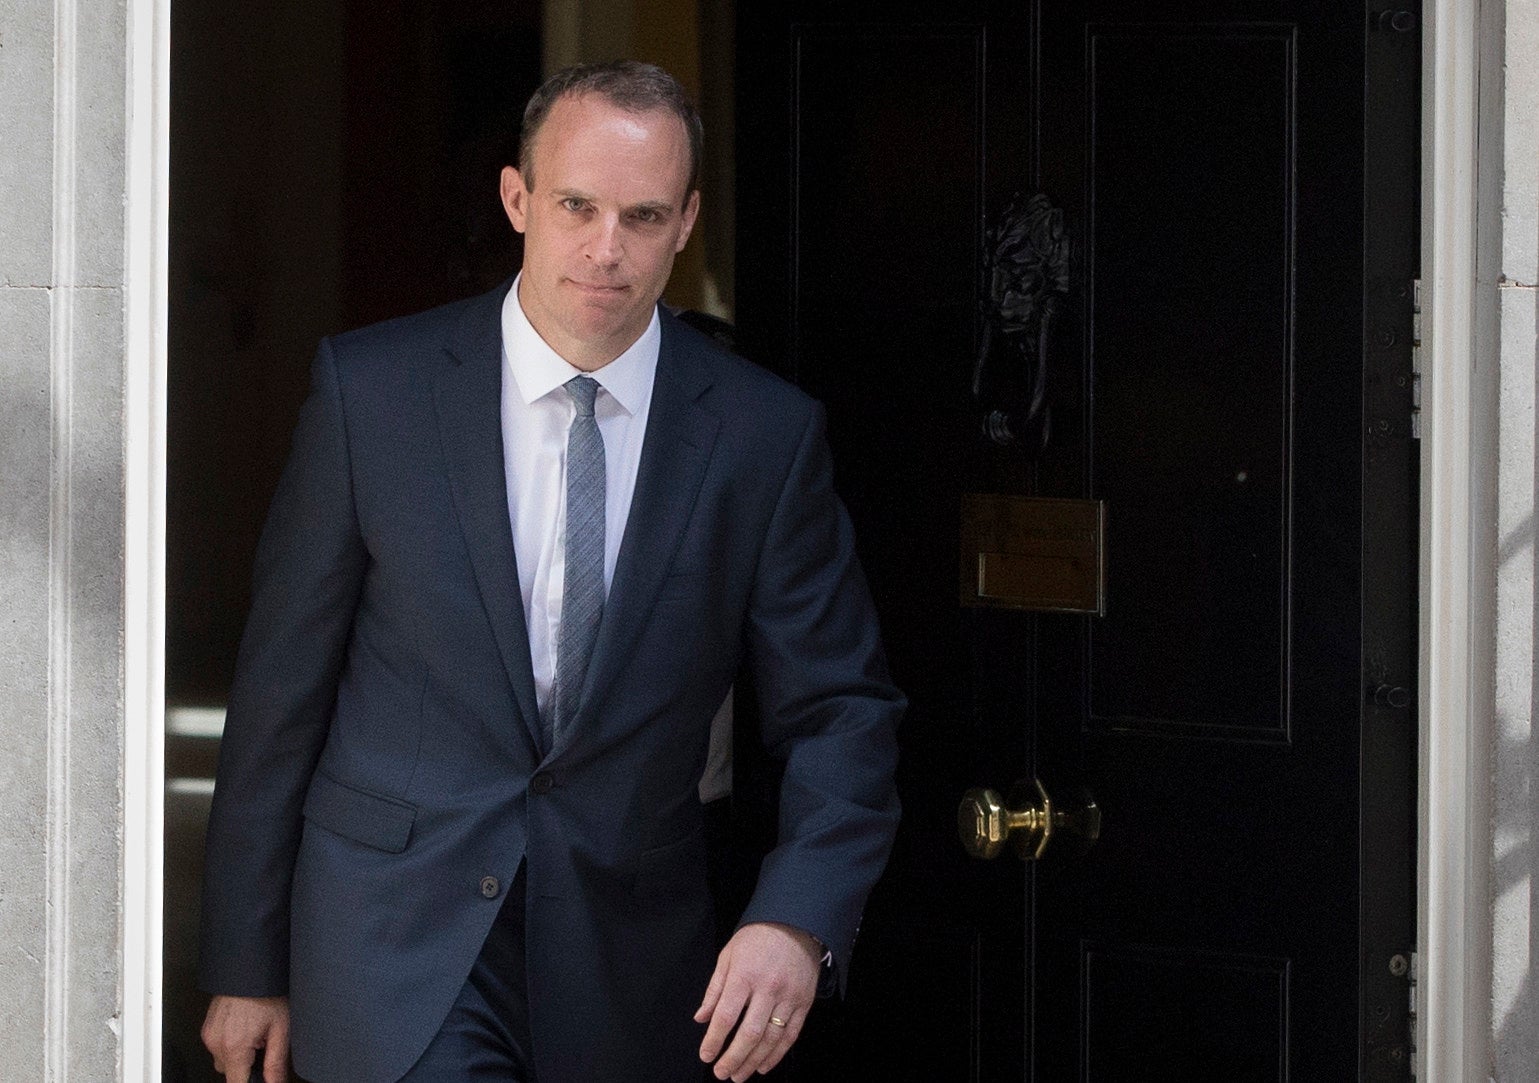 Dominic Raab, the new Brexit secretary, may be enthusiastic and capable, but will he be more persuasive to the EU than his predecessor?